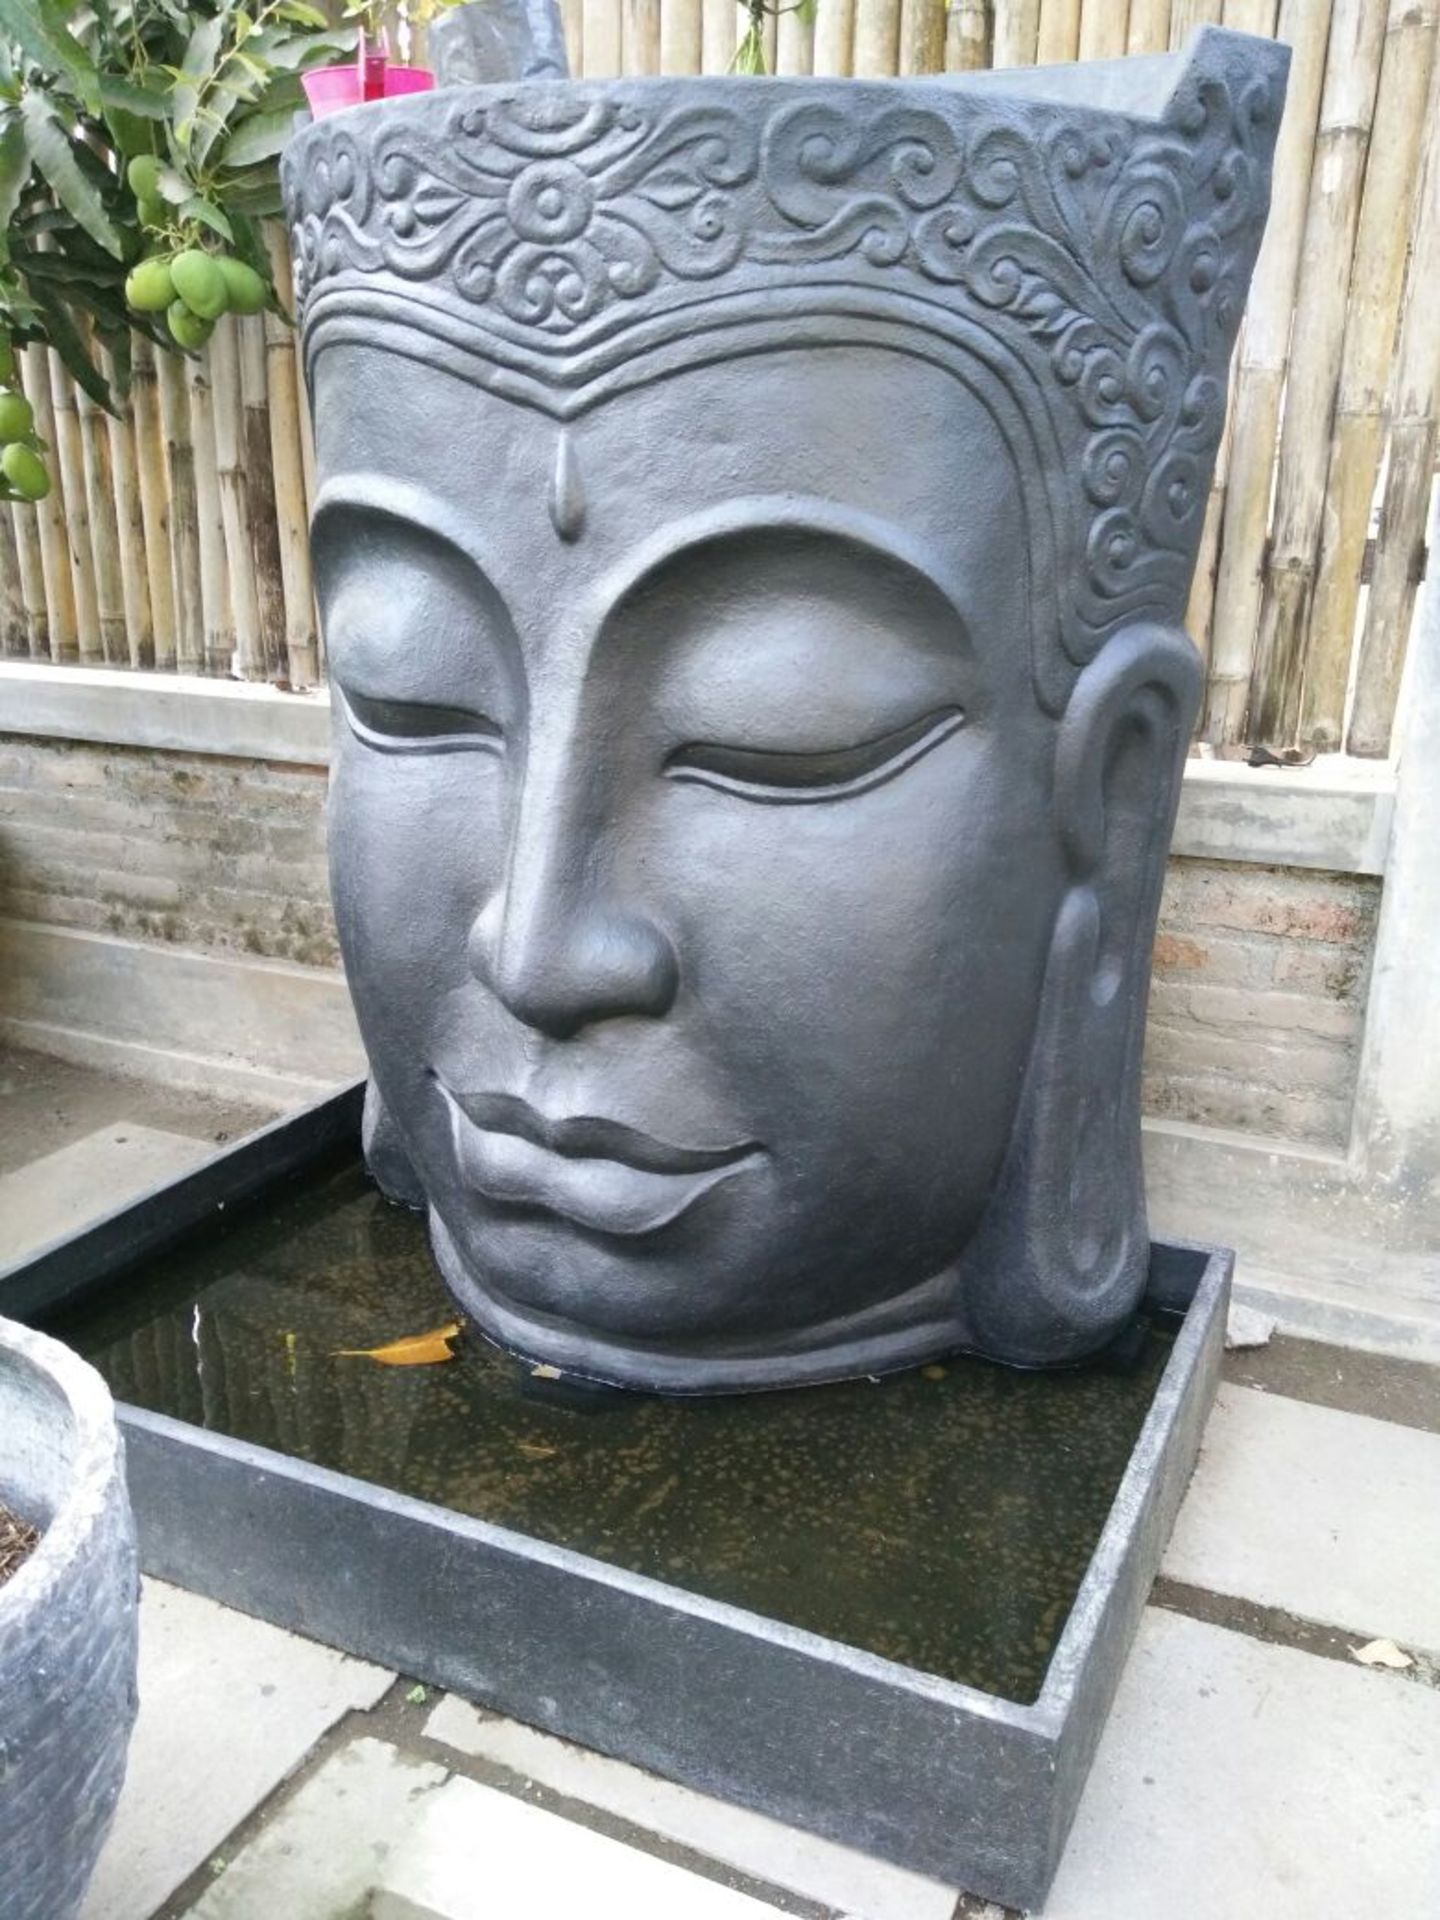 NEW MASSIVE CRATED WATER WALL FOUNTAIN AND TROUGH WITH BUDDHA HEAD FINISHED IN BRONZE